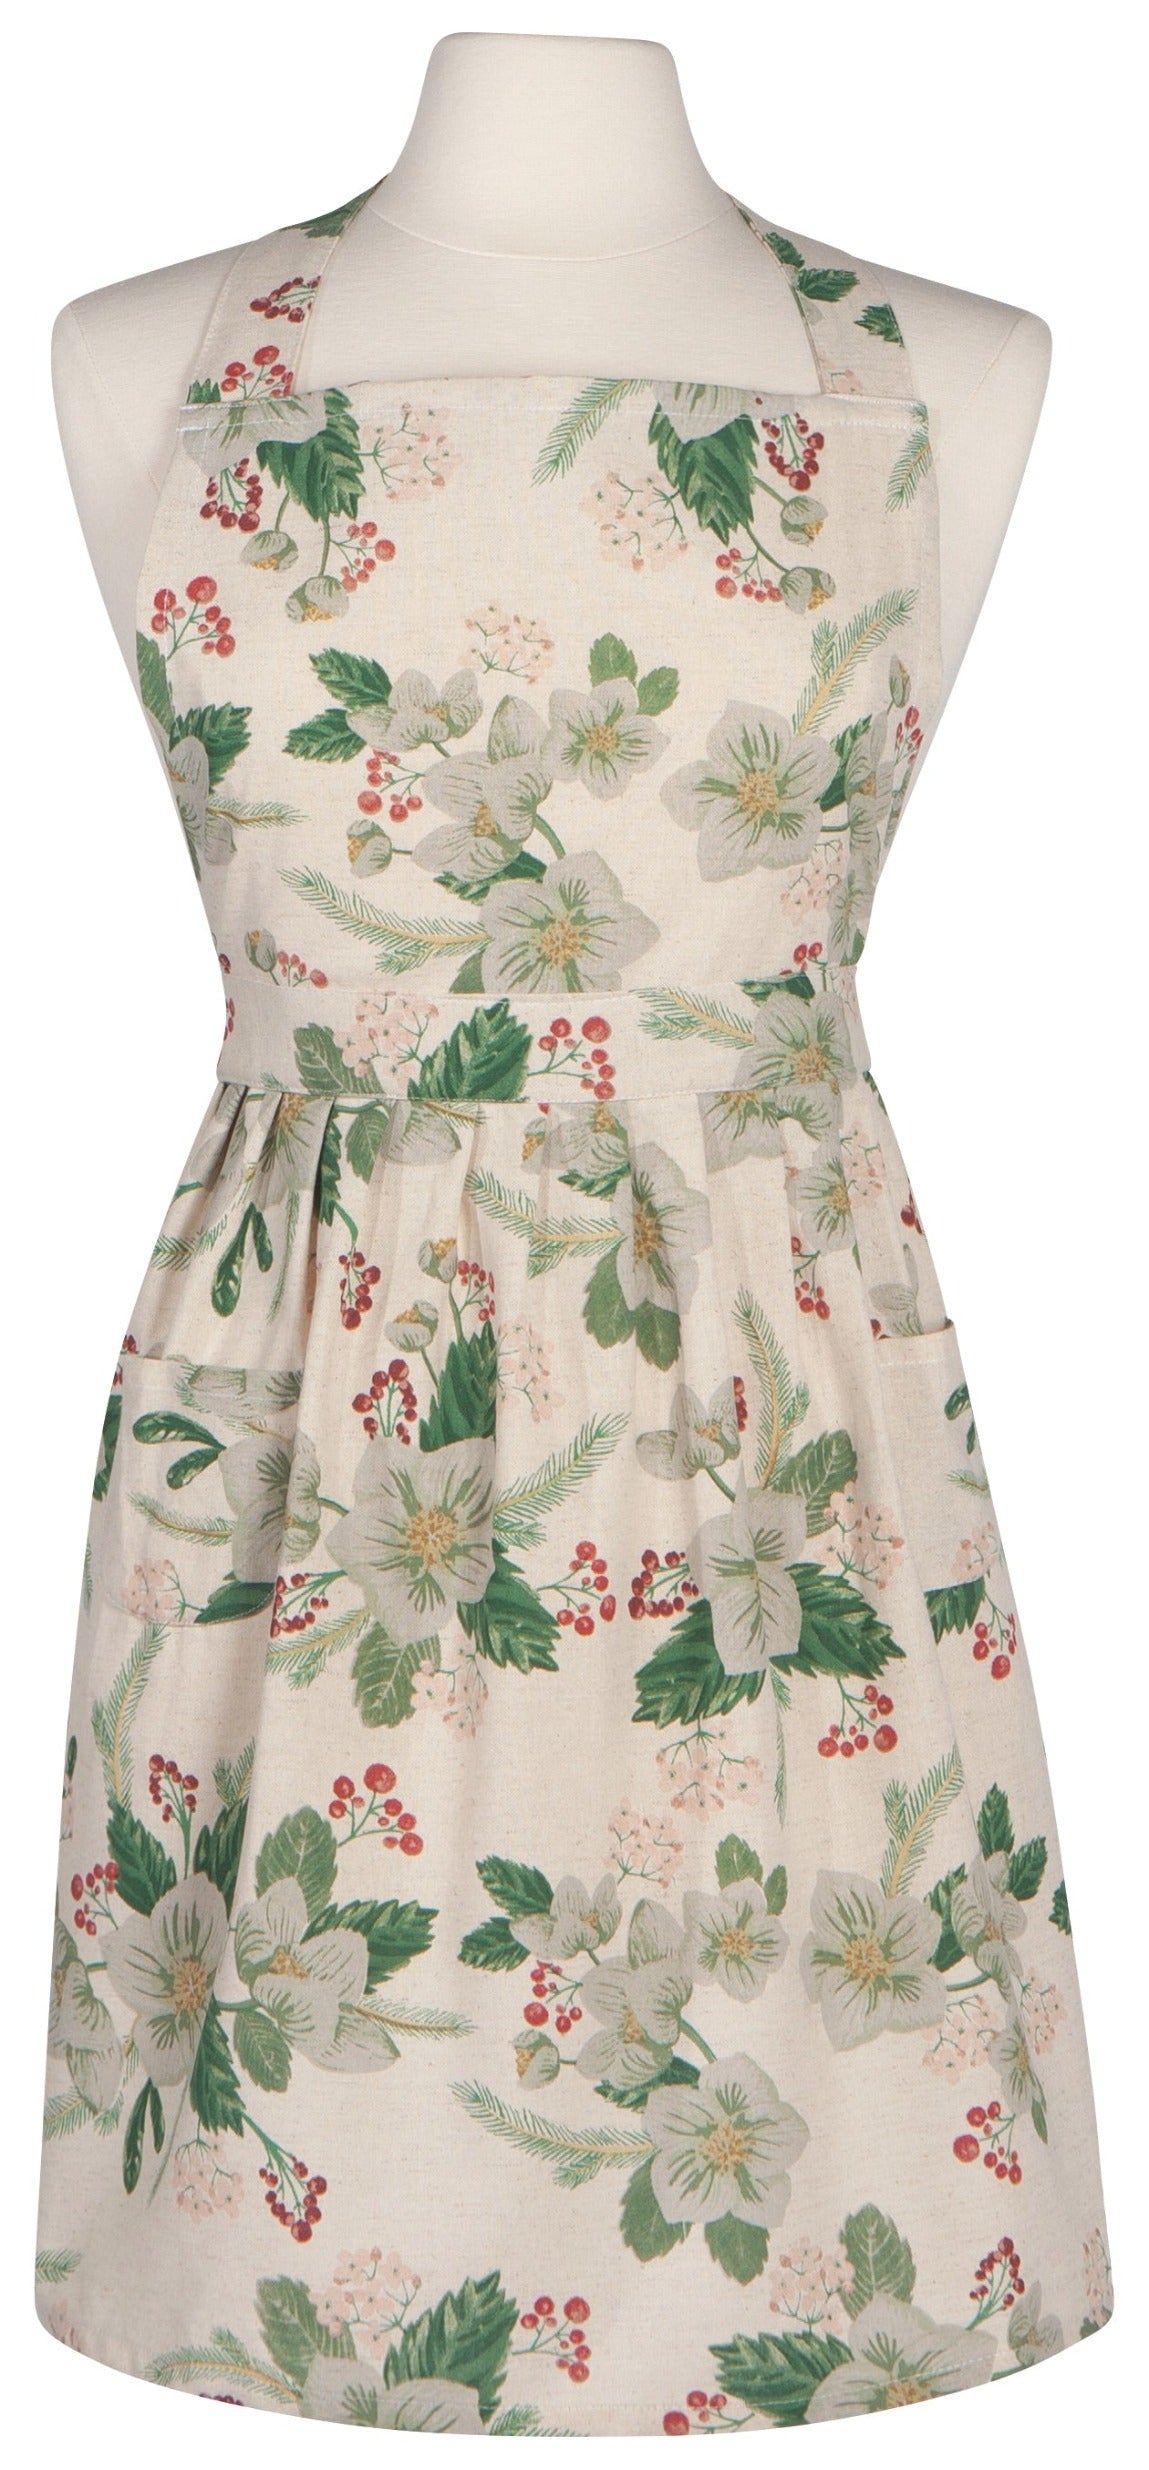 Cream coloured apron with white blossom flowers printed on it